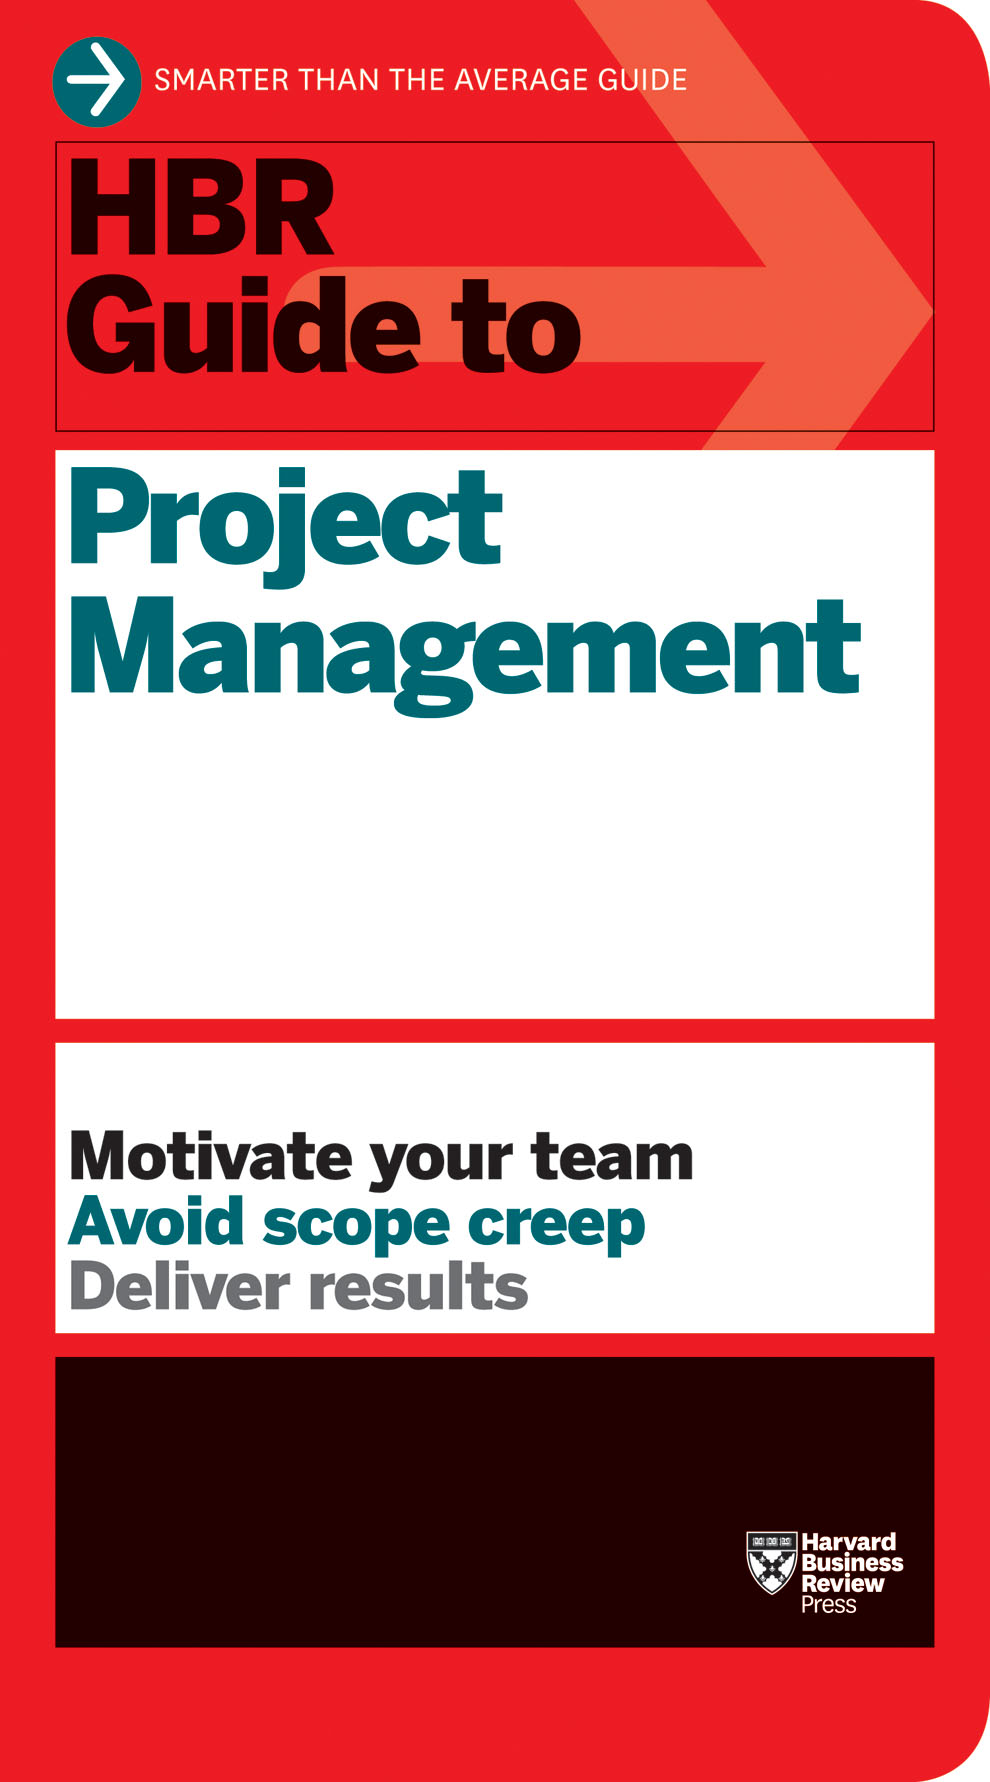 HBR GUIDE TO PROJECT MANAGEMENT